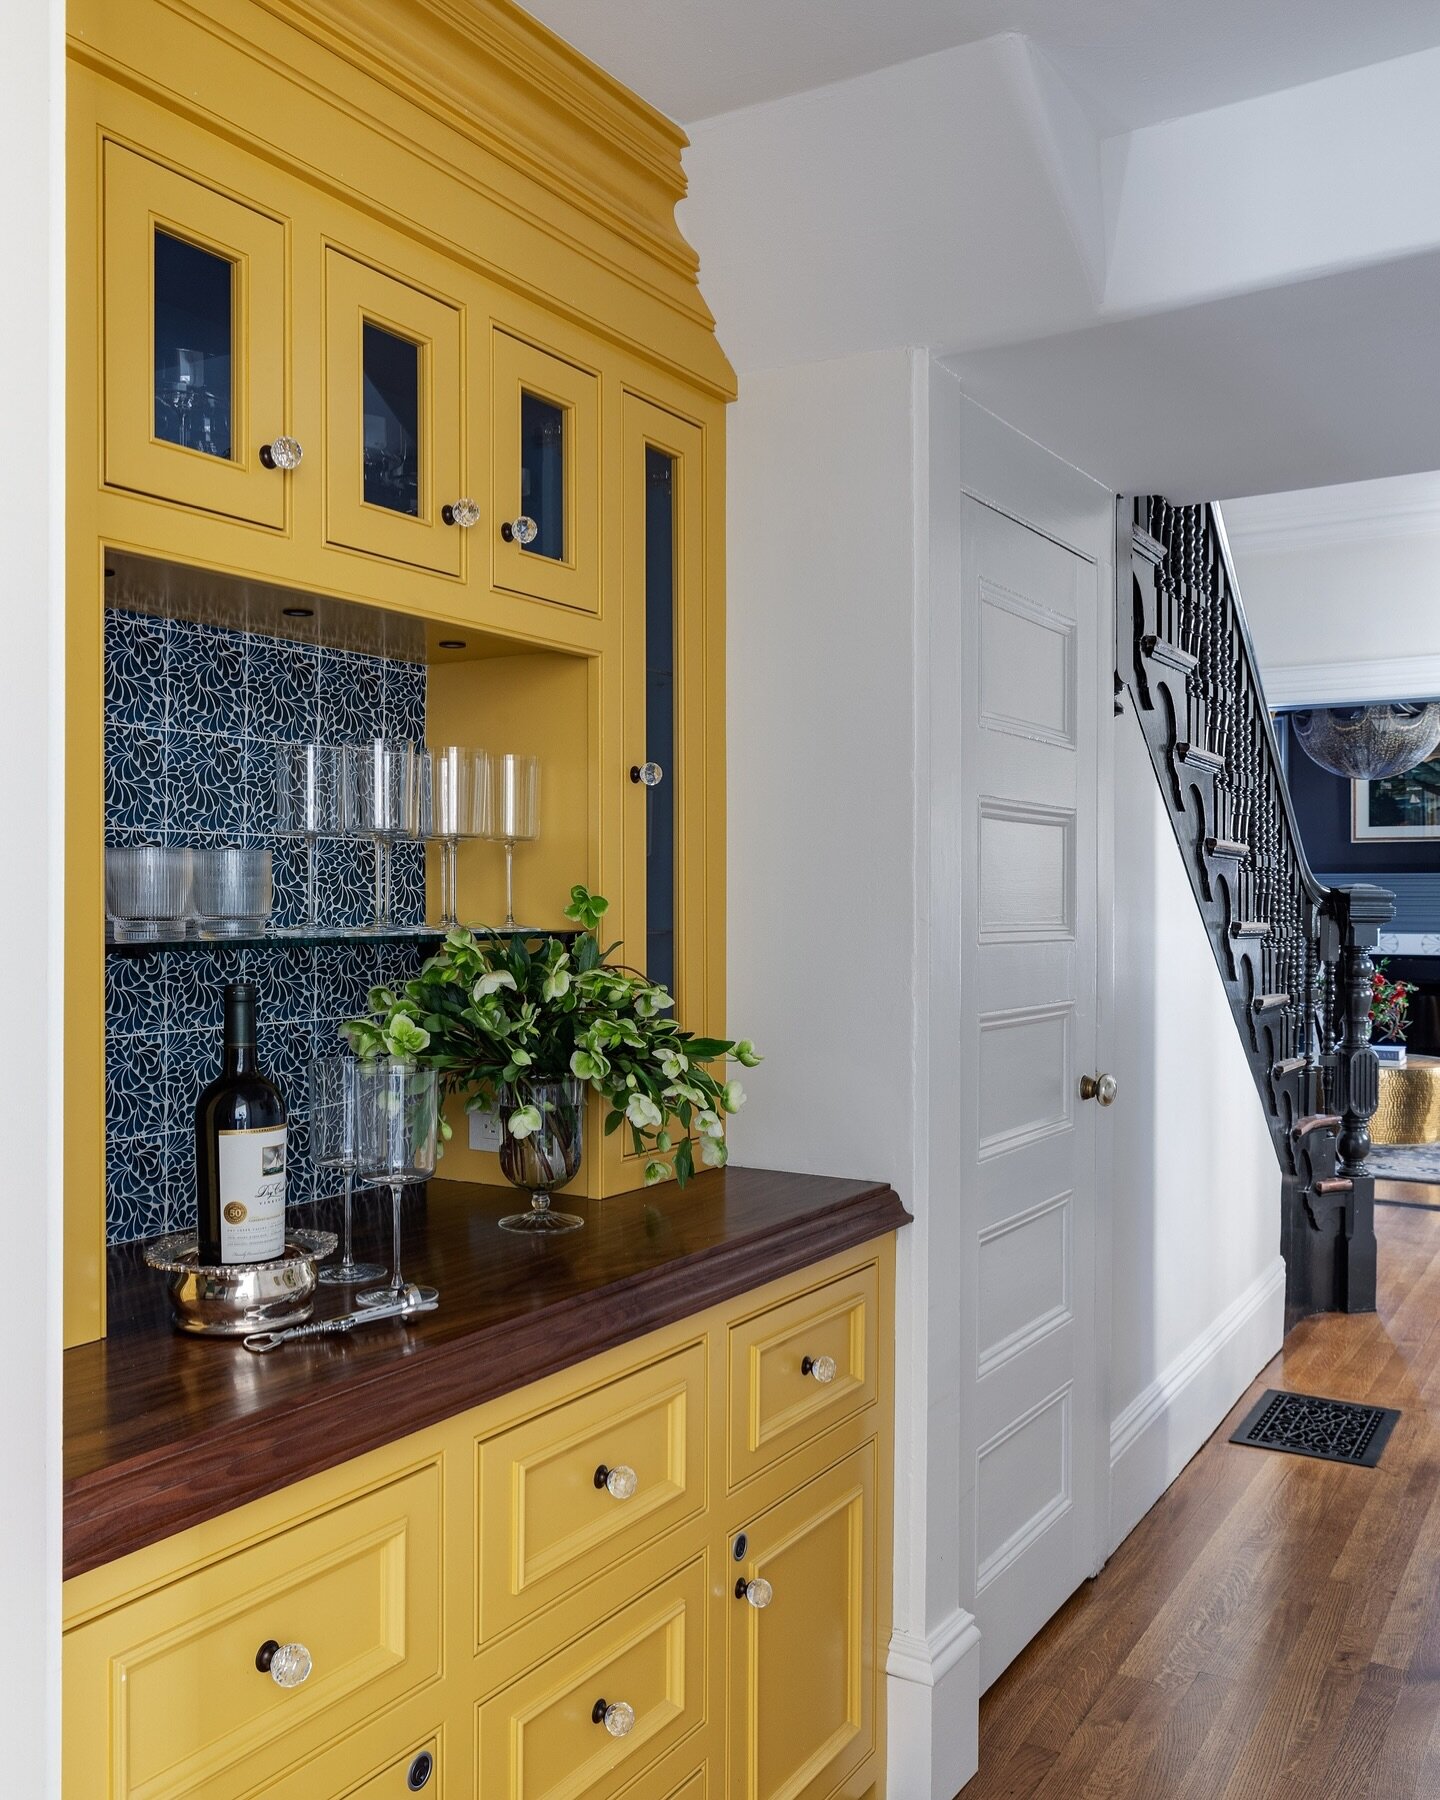 a burst of radiant color on the built in bar brings new meaning to happy hour 💫⁠
⁠
We love a good under-the-stairs bar - it&rsquo;s the perfect way to improve practicality, maximize a small space AND add allure to an unexpected area of the home. Che